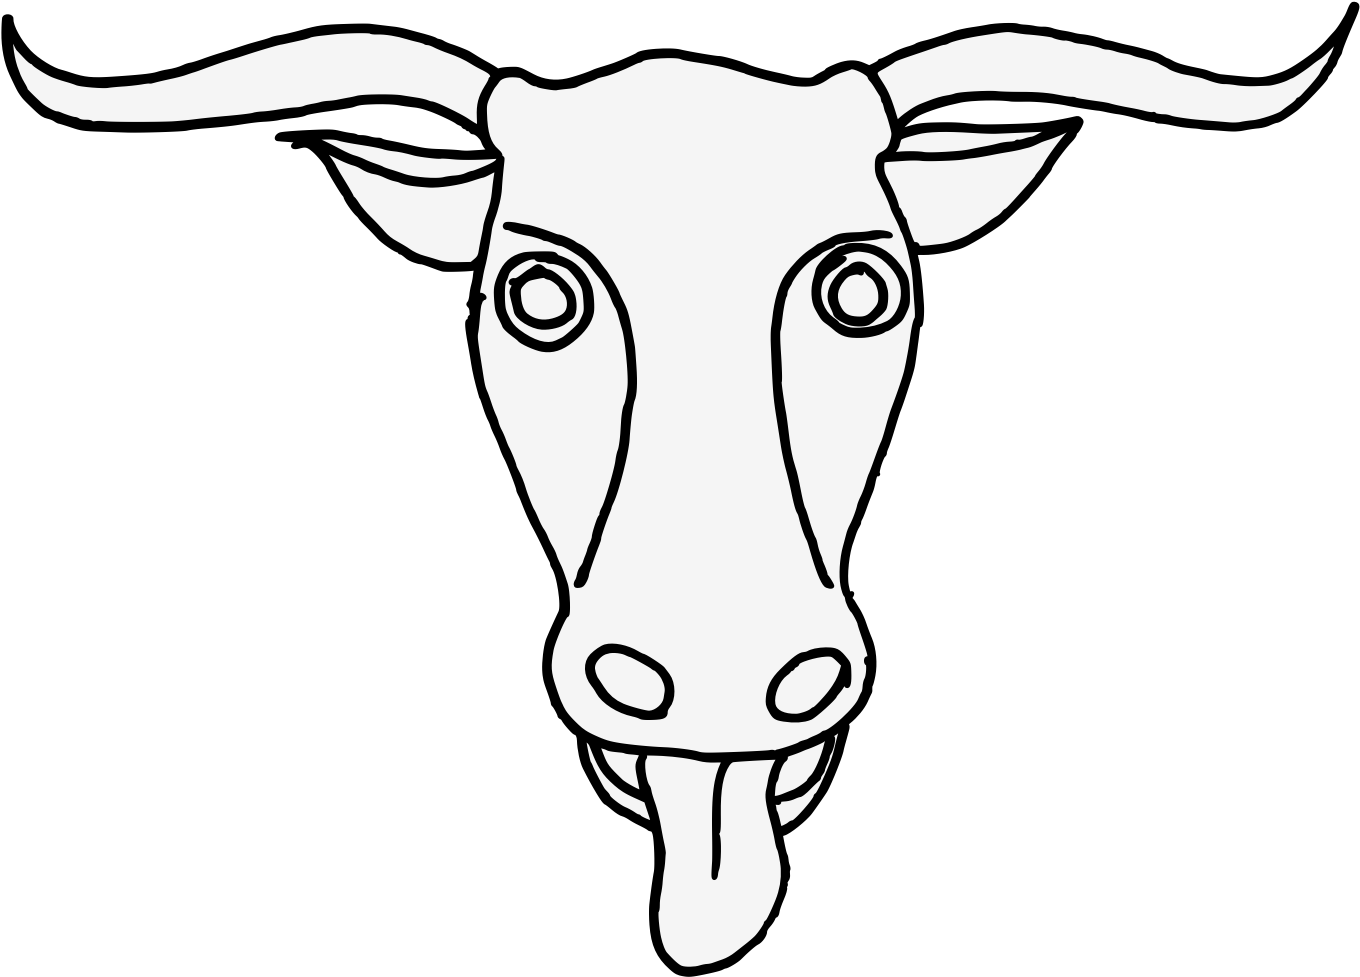 A White Cow Head With Horns And Tongue Sticking Out